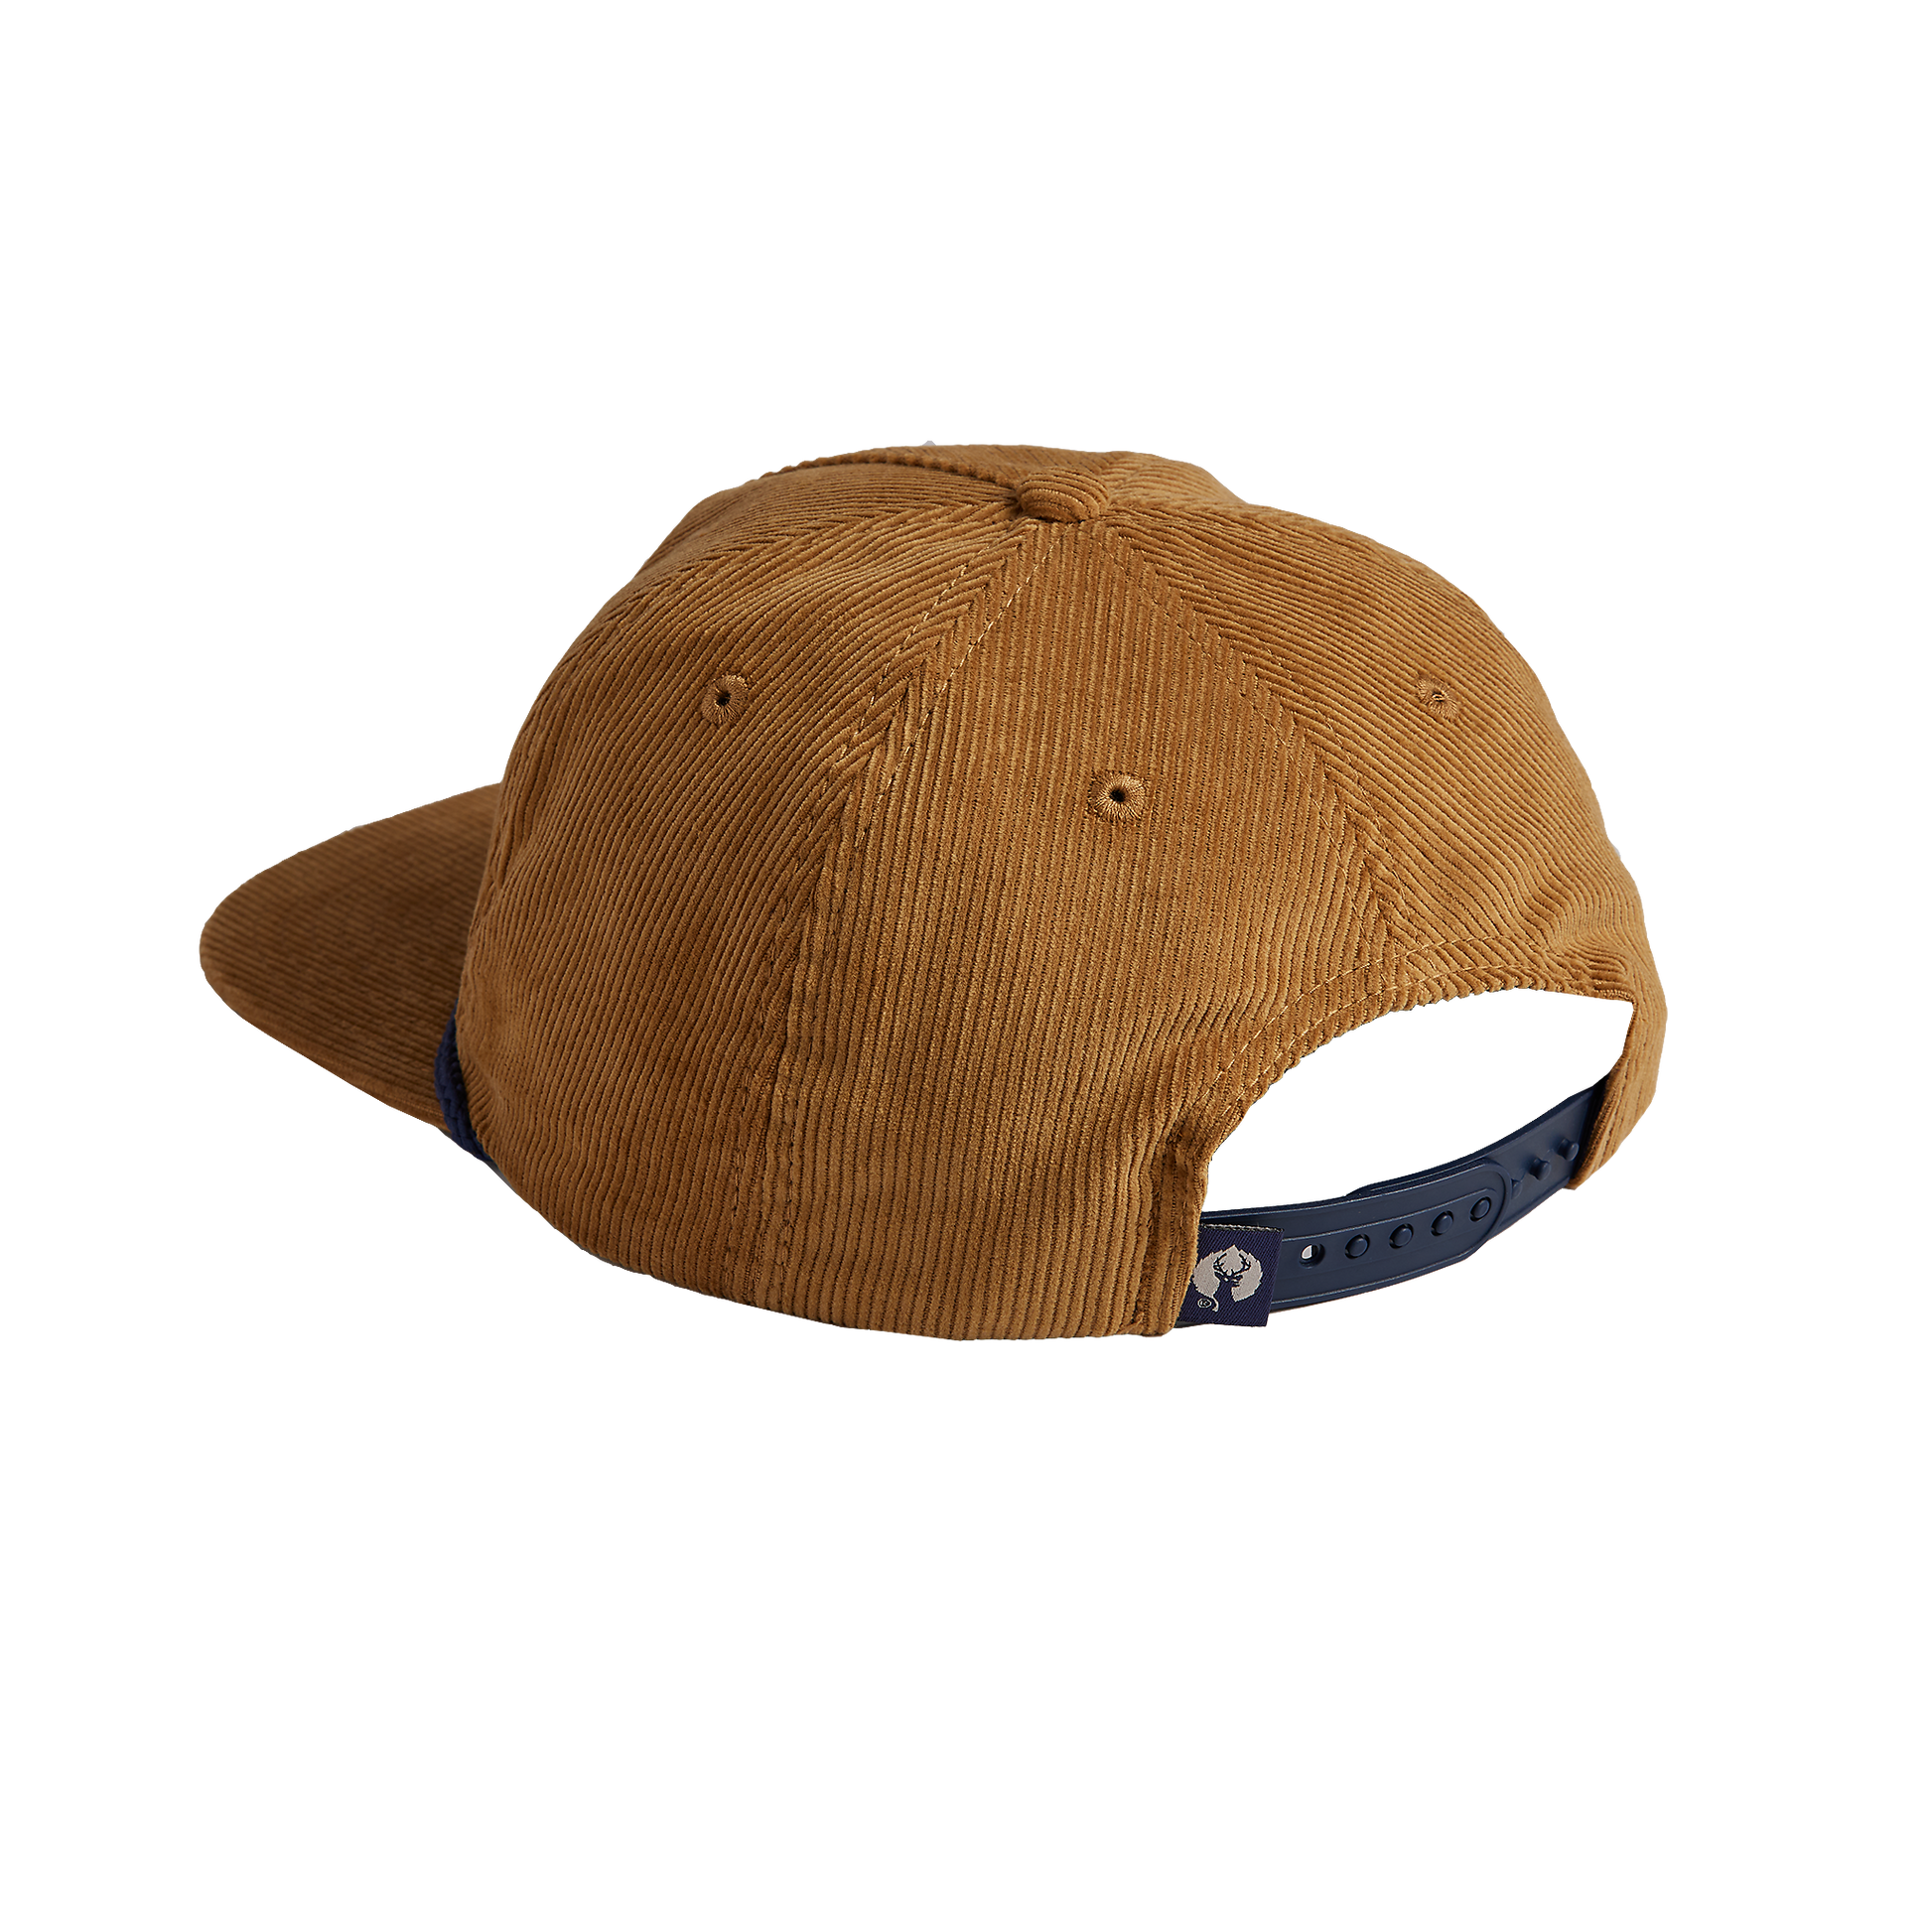 back view of Khaki colored corduroy cap with a blue rope across the brim with adjustable snapback